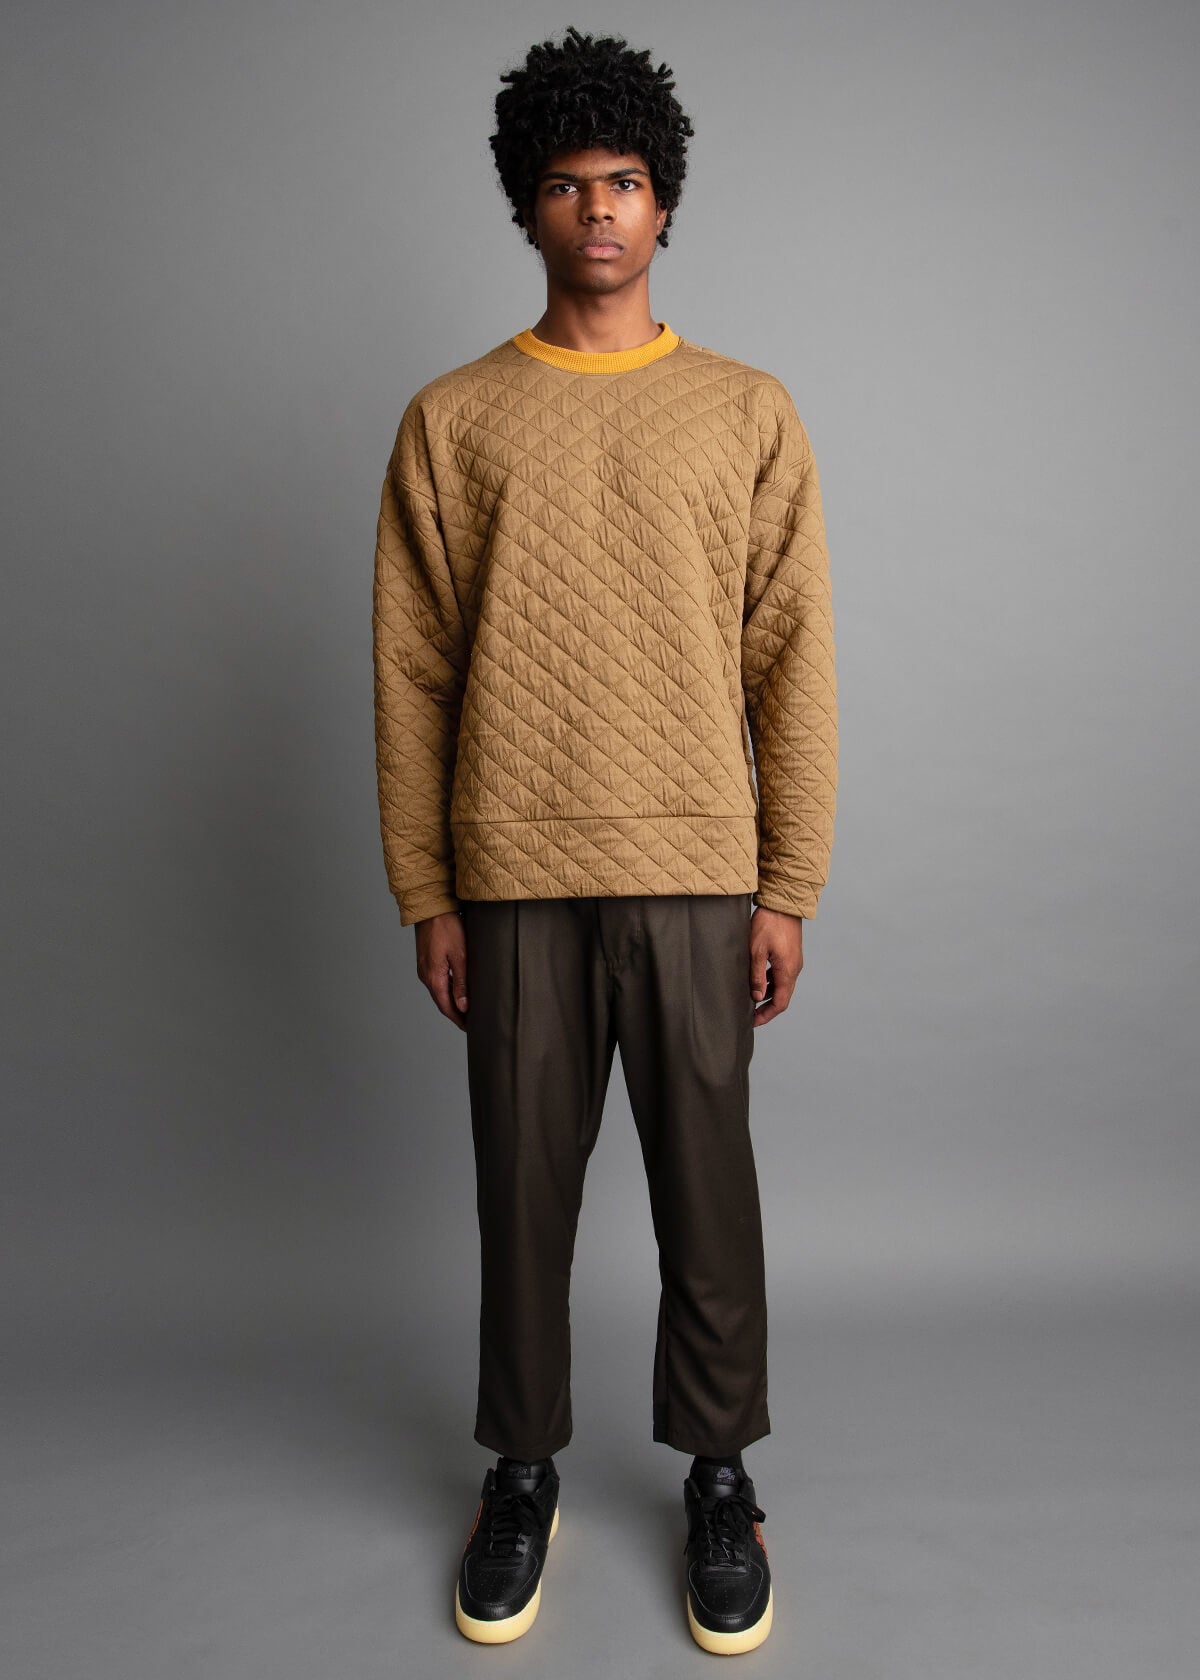 Hypnosis Knit Olive Rlx Fit